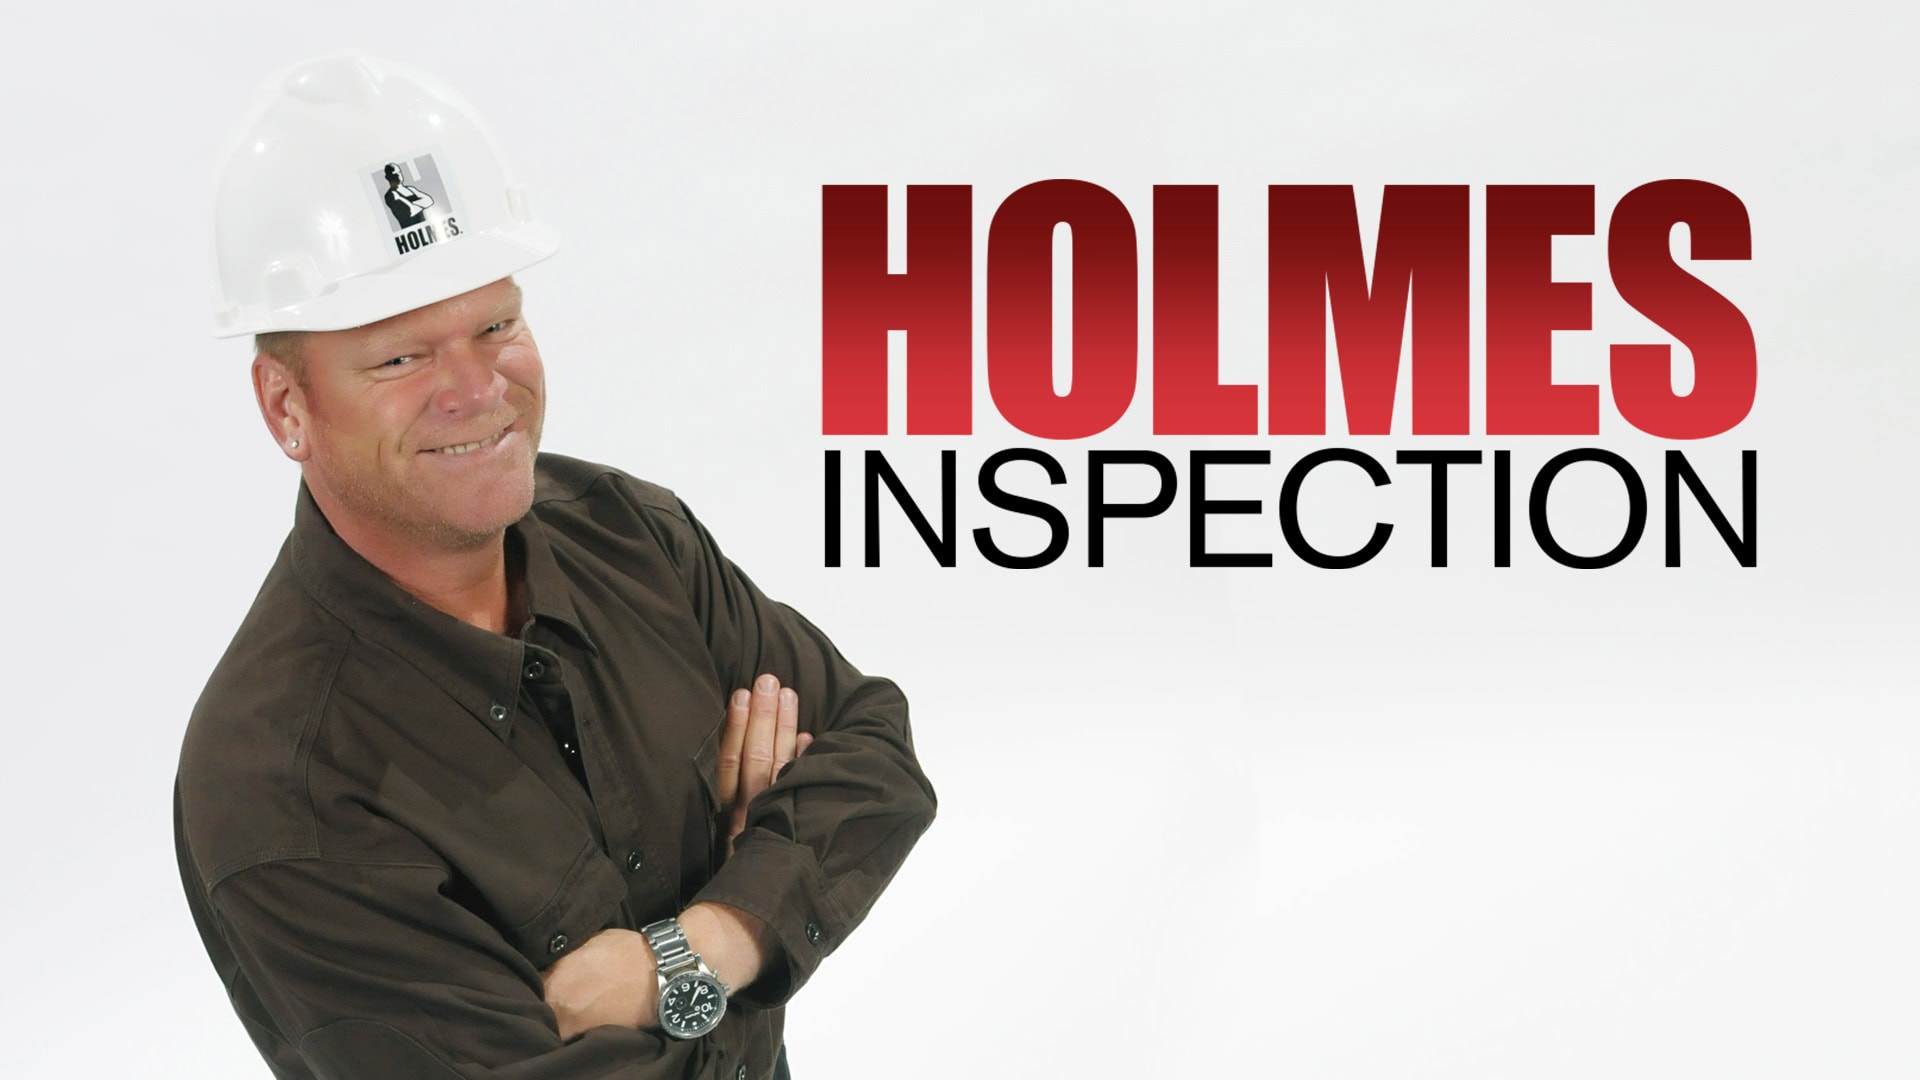 Holmes Inspection on Homeful TV FREE Fast Streaming Chanel